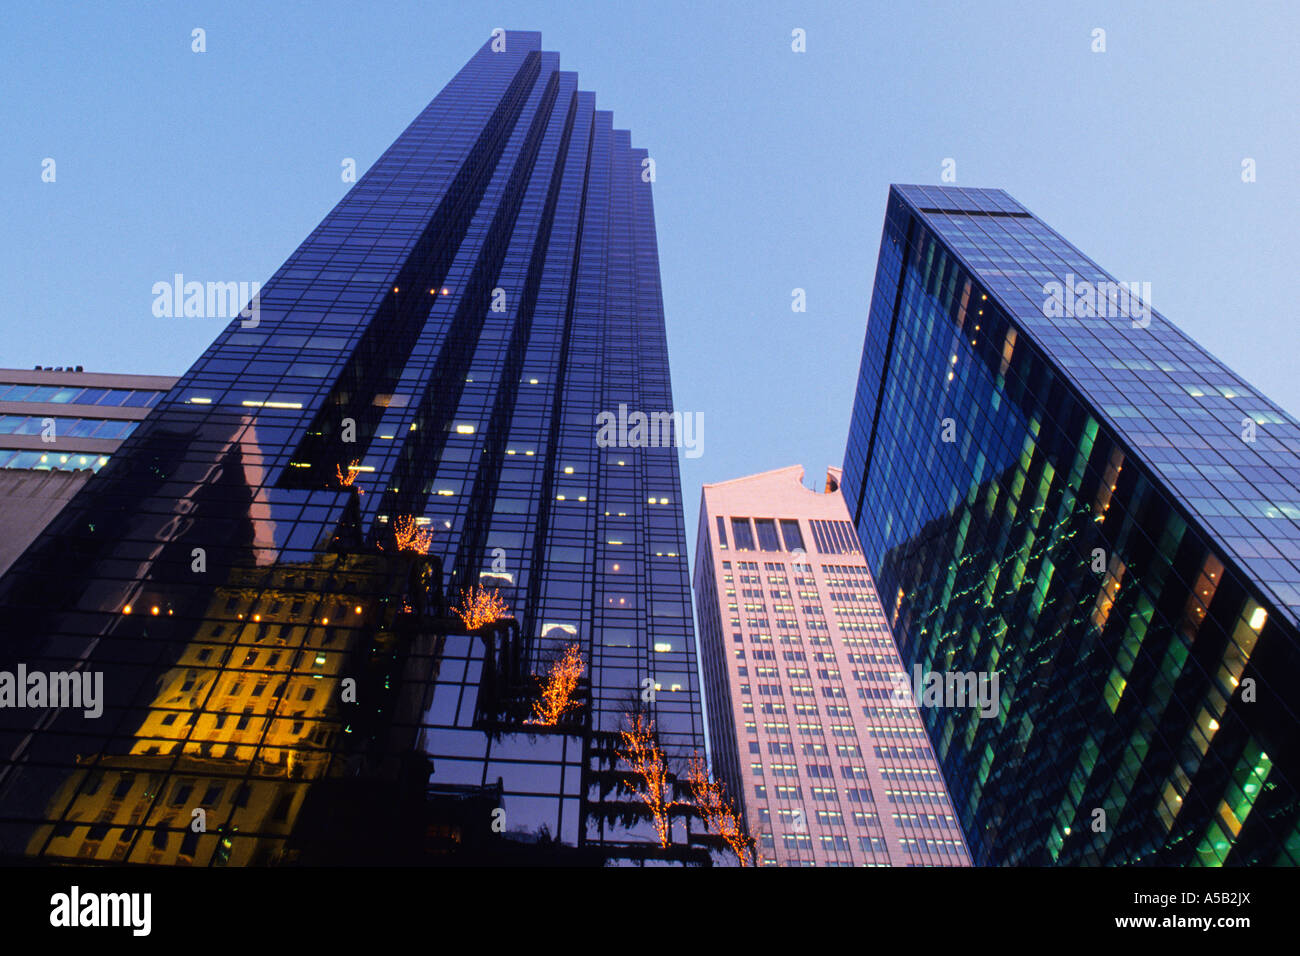 New York City Trump Tower and the Sony Building. Two modern skyscraper glass towers in Midtown Manhattan on Fifth Avenue. Stock Photo